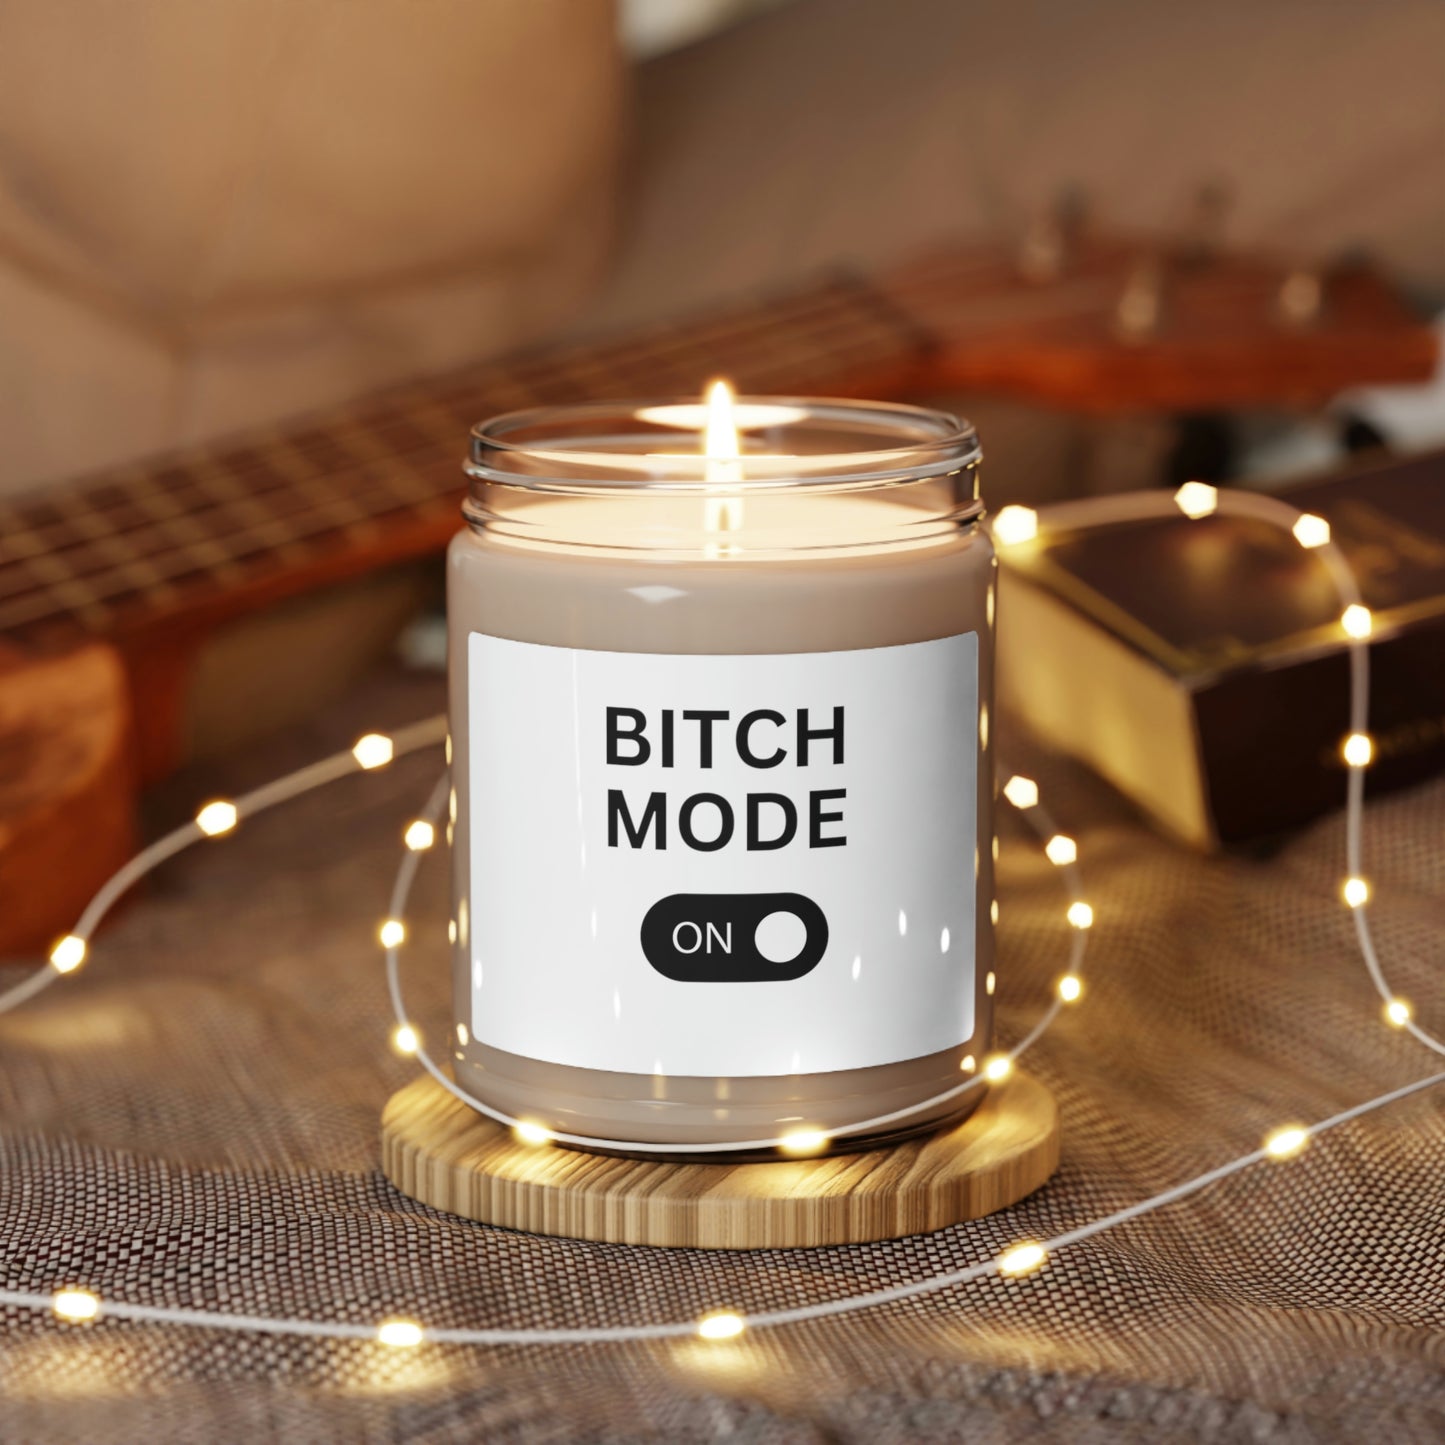 Bitch Mode On Custom Candle Scented Soy Candle | Funny Gift for Moms and Friends - Eb Creations Home Decor Bitch Mode On Custom Candle Scented Soy Candle | Funny Gift for Moms and Friends